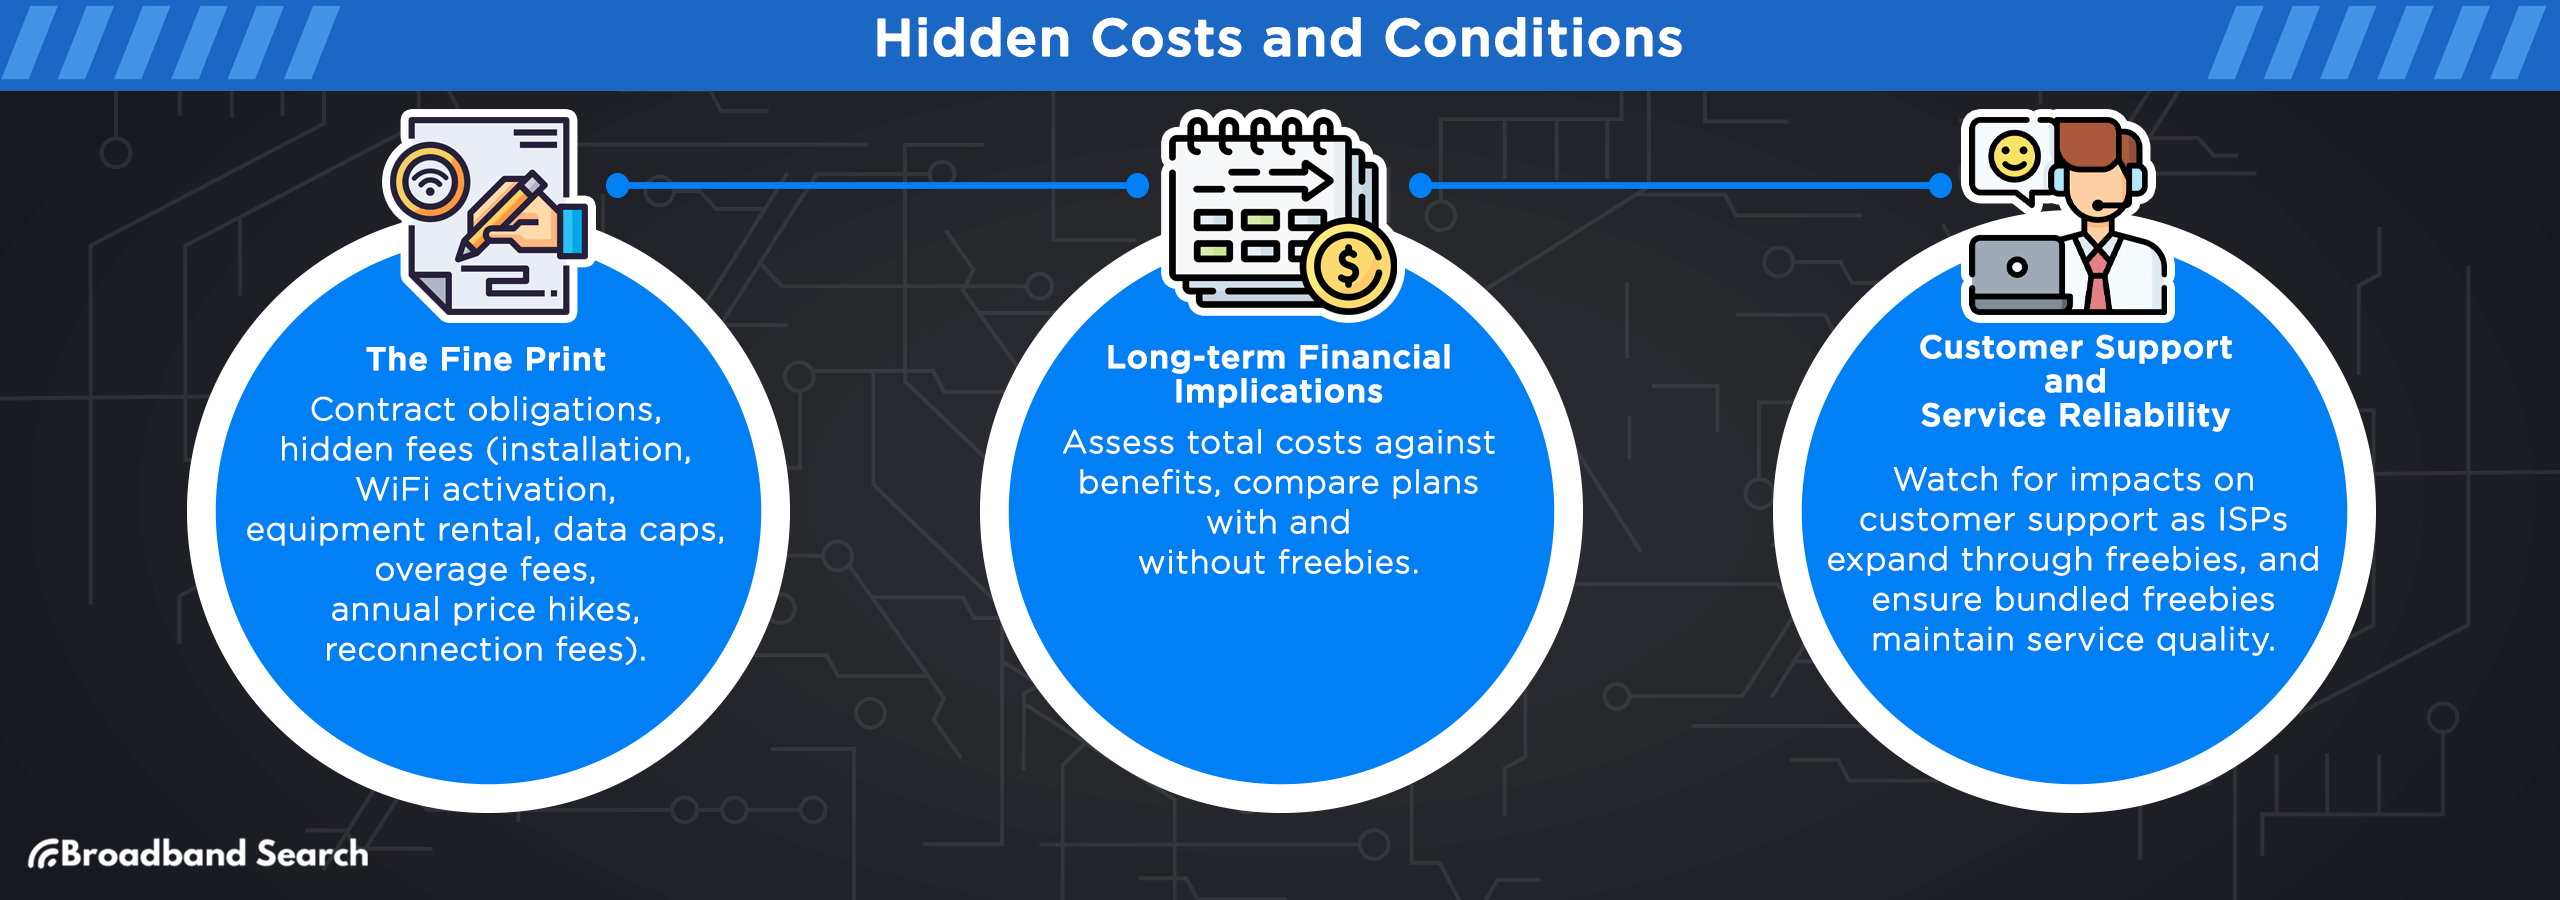 Hidden Costs and Conditions